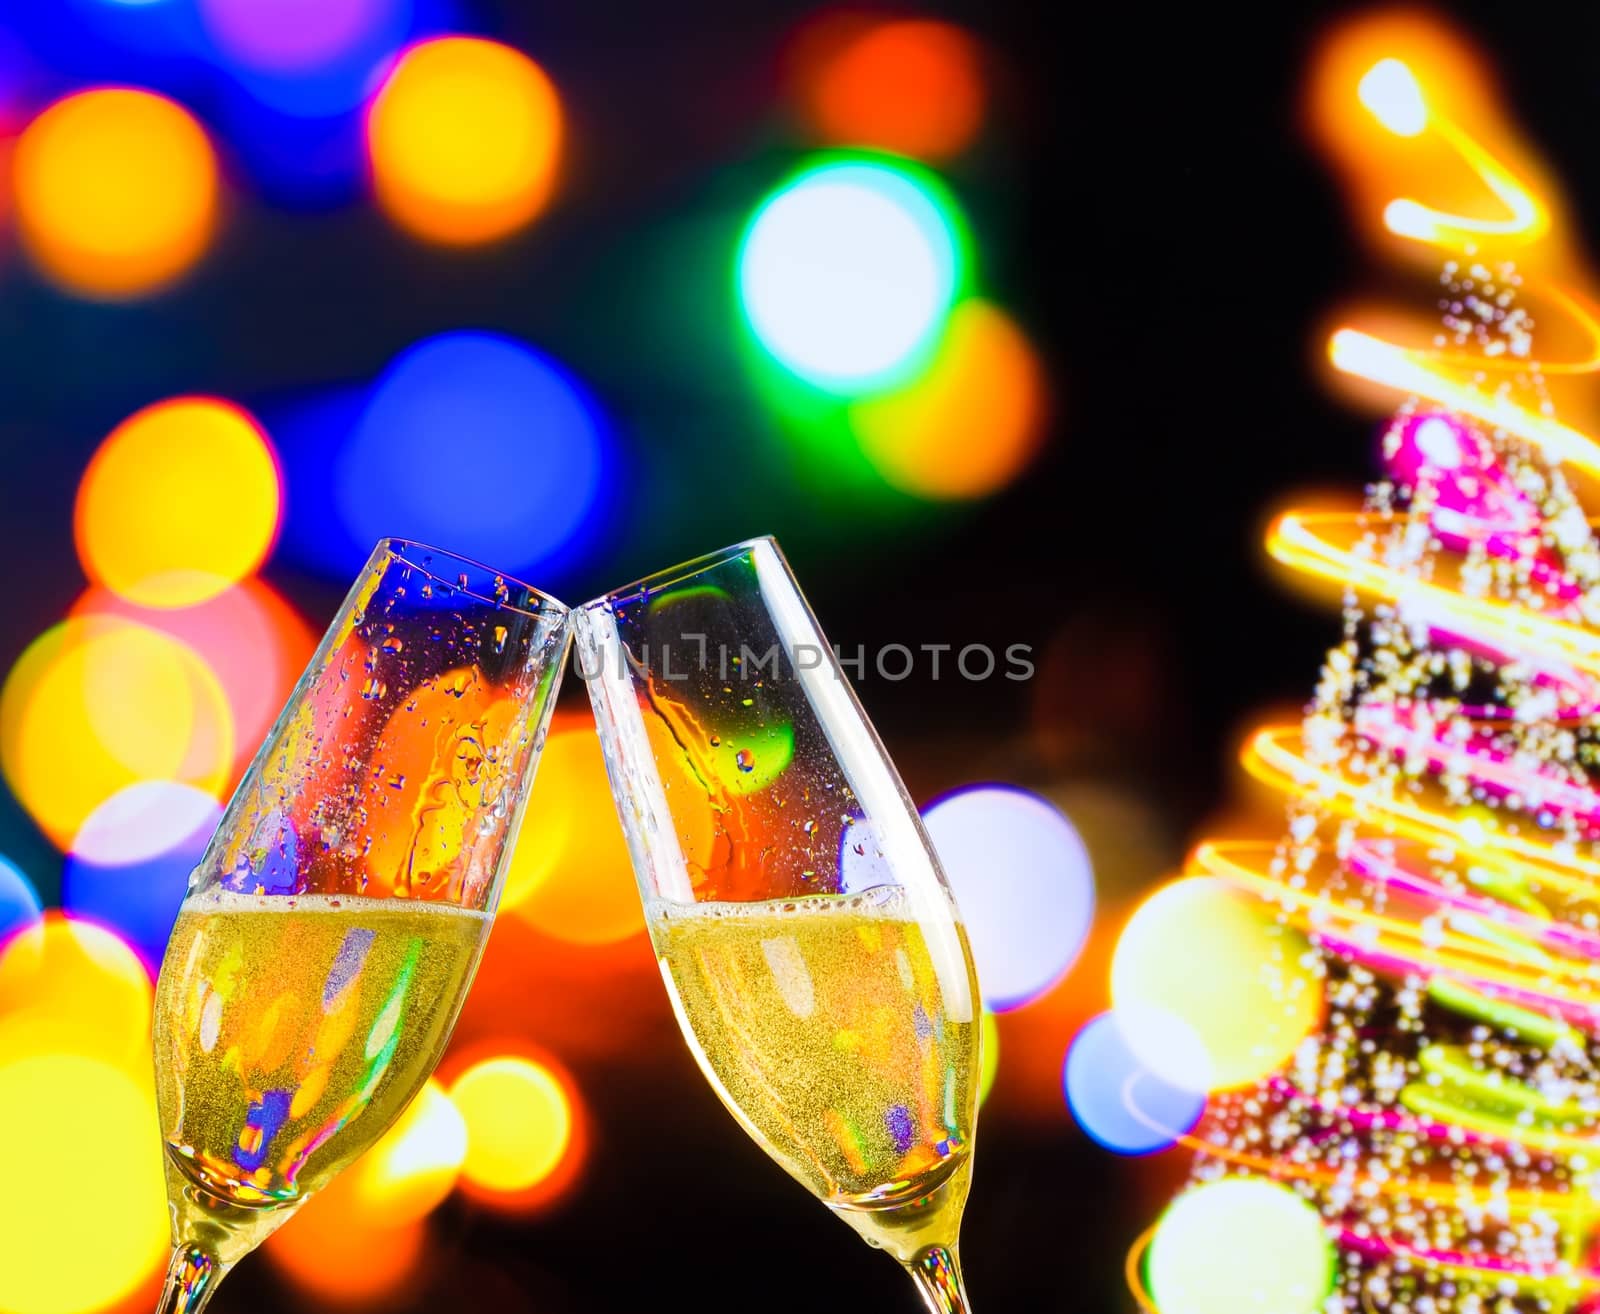 champagne flutes with golden bubbles make cheers on christmas lights bokeh decoration background, christmas atmosphere